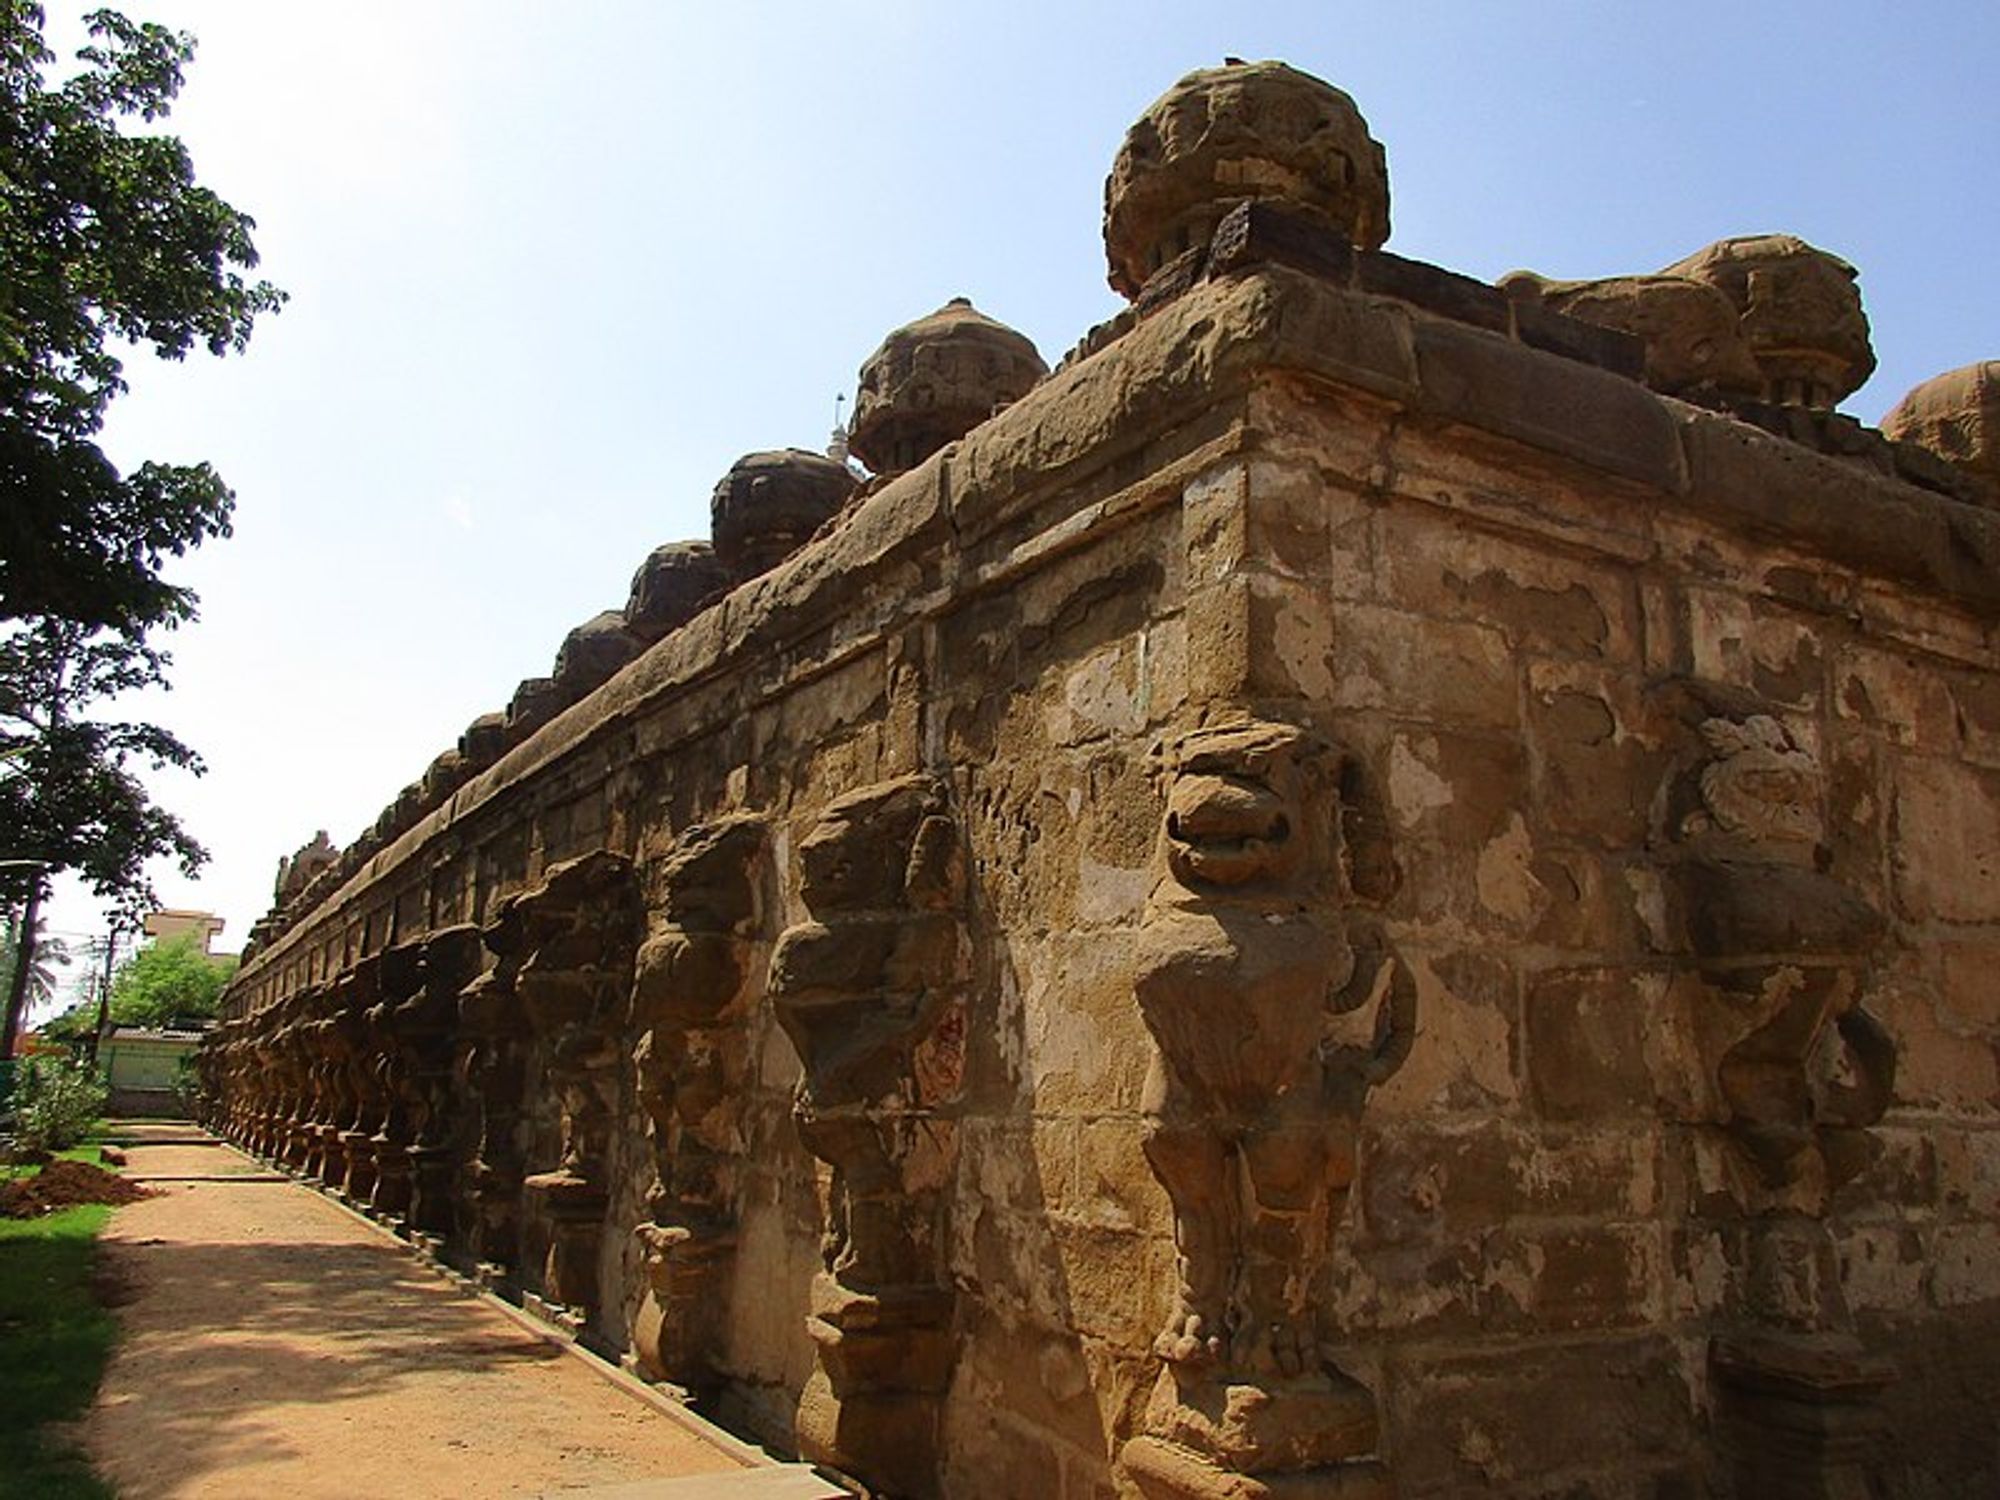 The outer wall of the Temple I Source: Wikimedia Commons